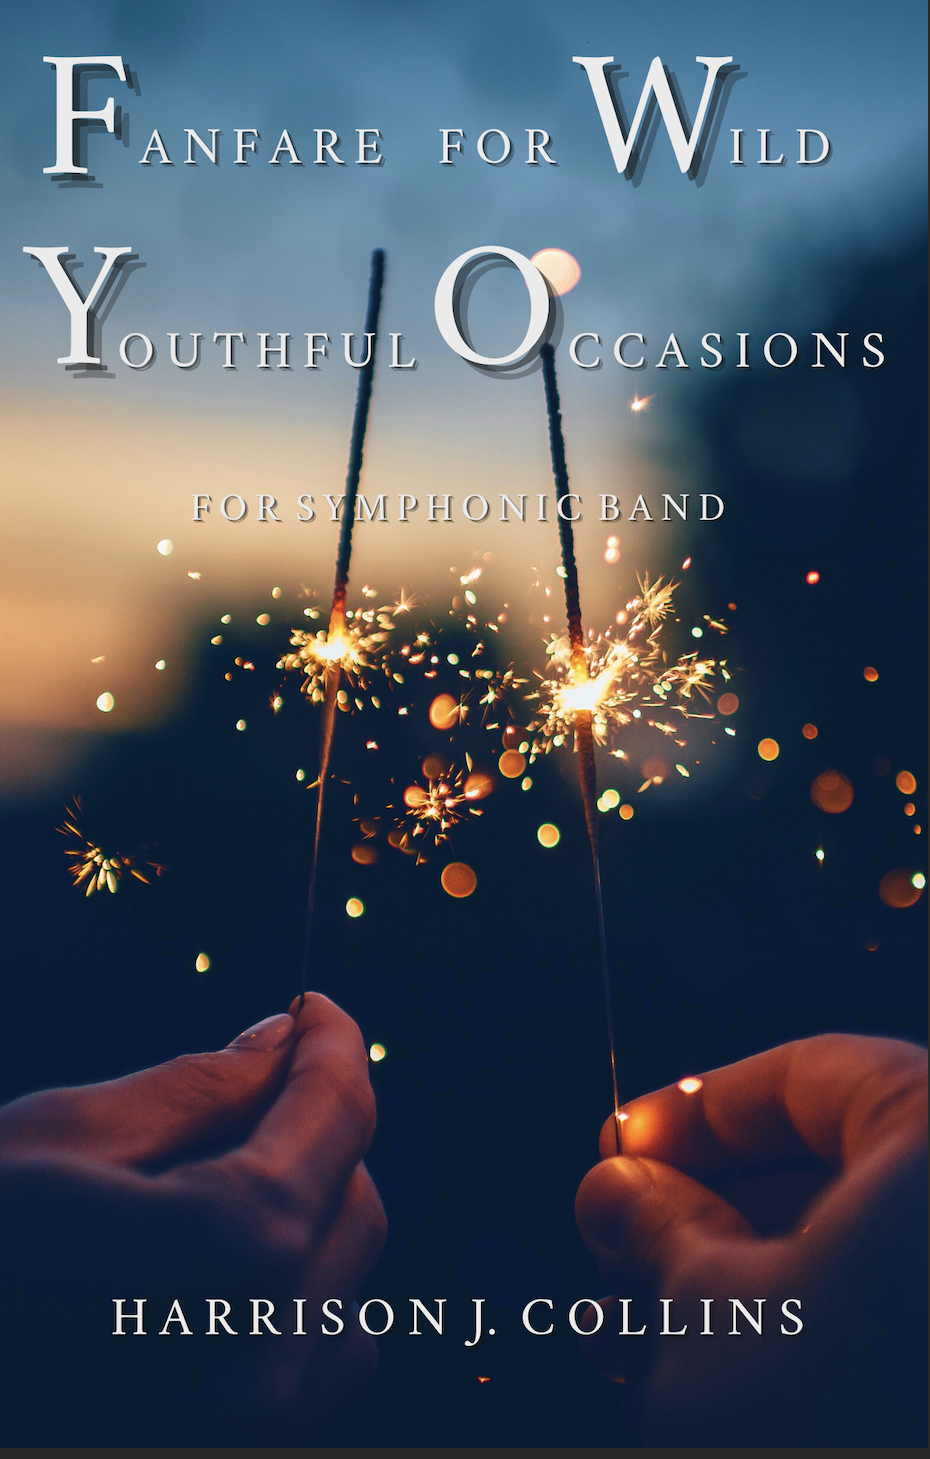 Fanfare For Wild Youthful Occasions (Score Only) by Harrison Collins